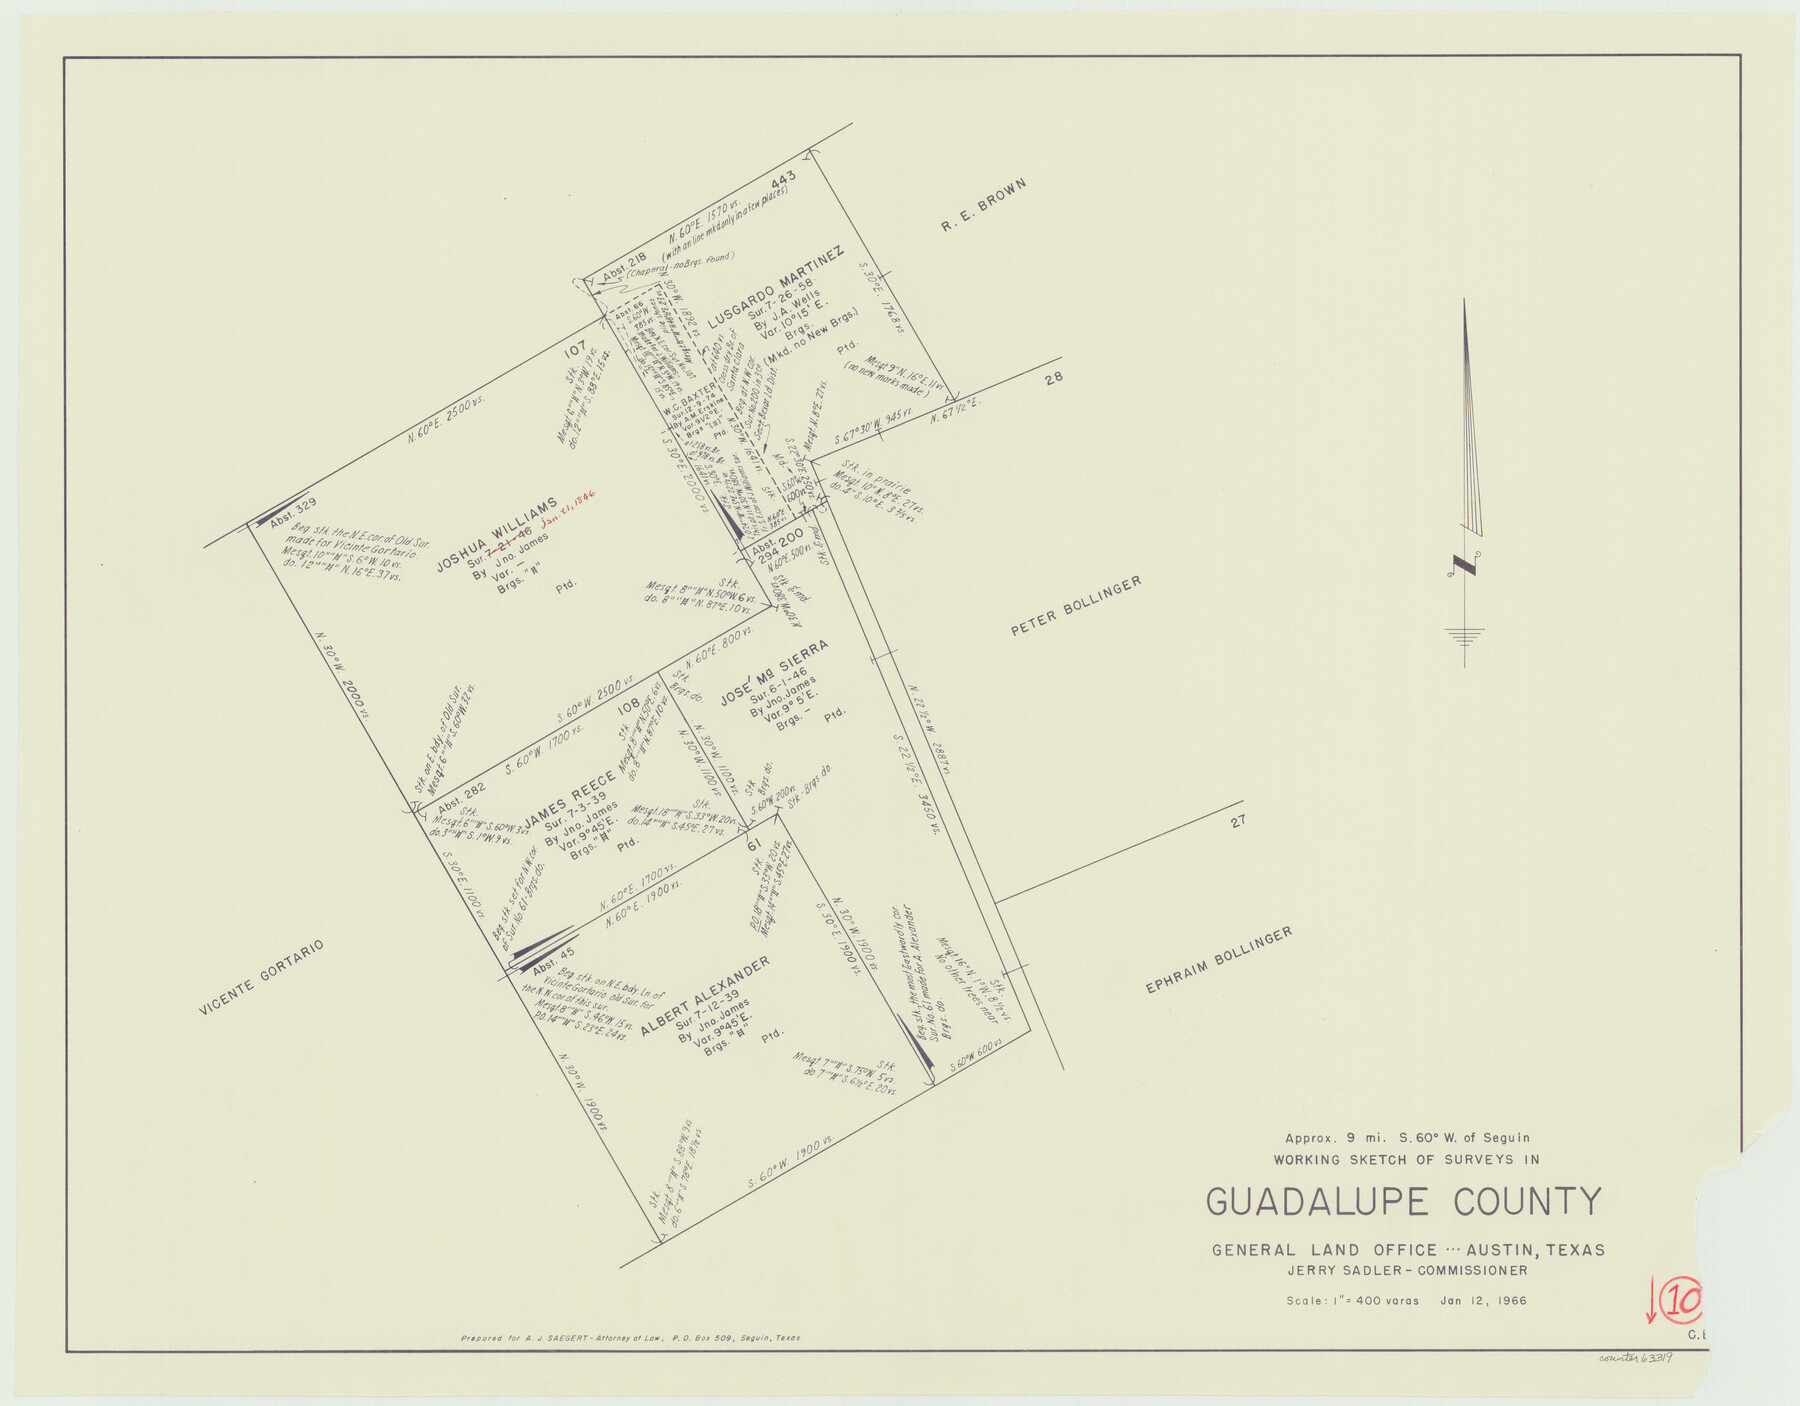 63319, Guadalupe County Working Sketch 10, General Map Collection